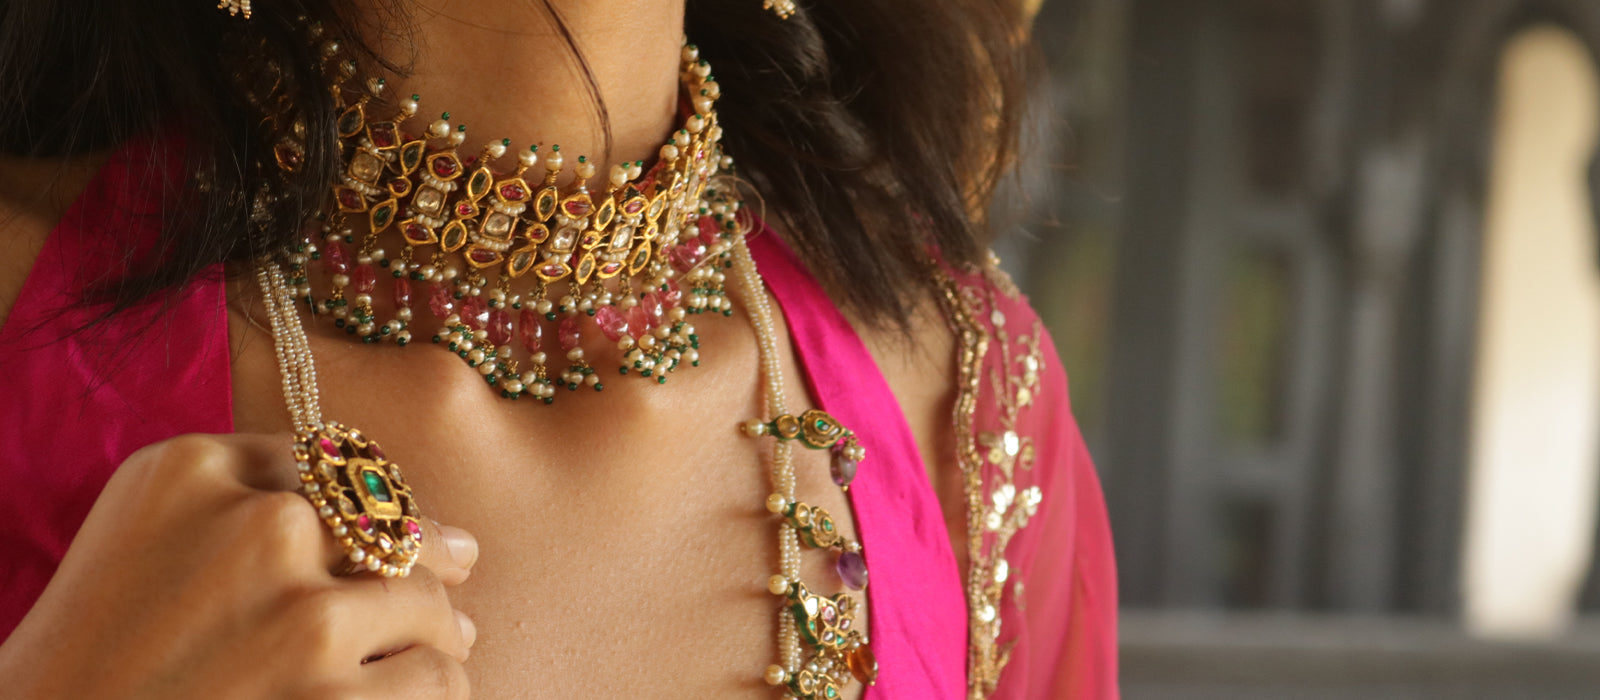 Fine Jewelry for Your Pretty Pink Bridal Lehenga!